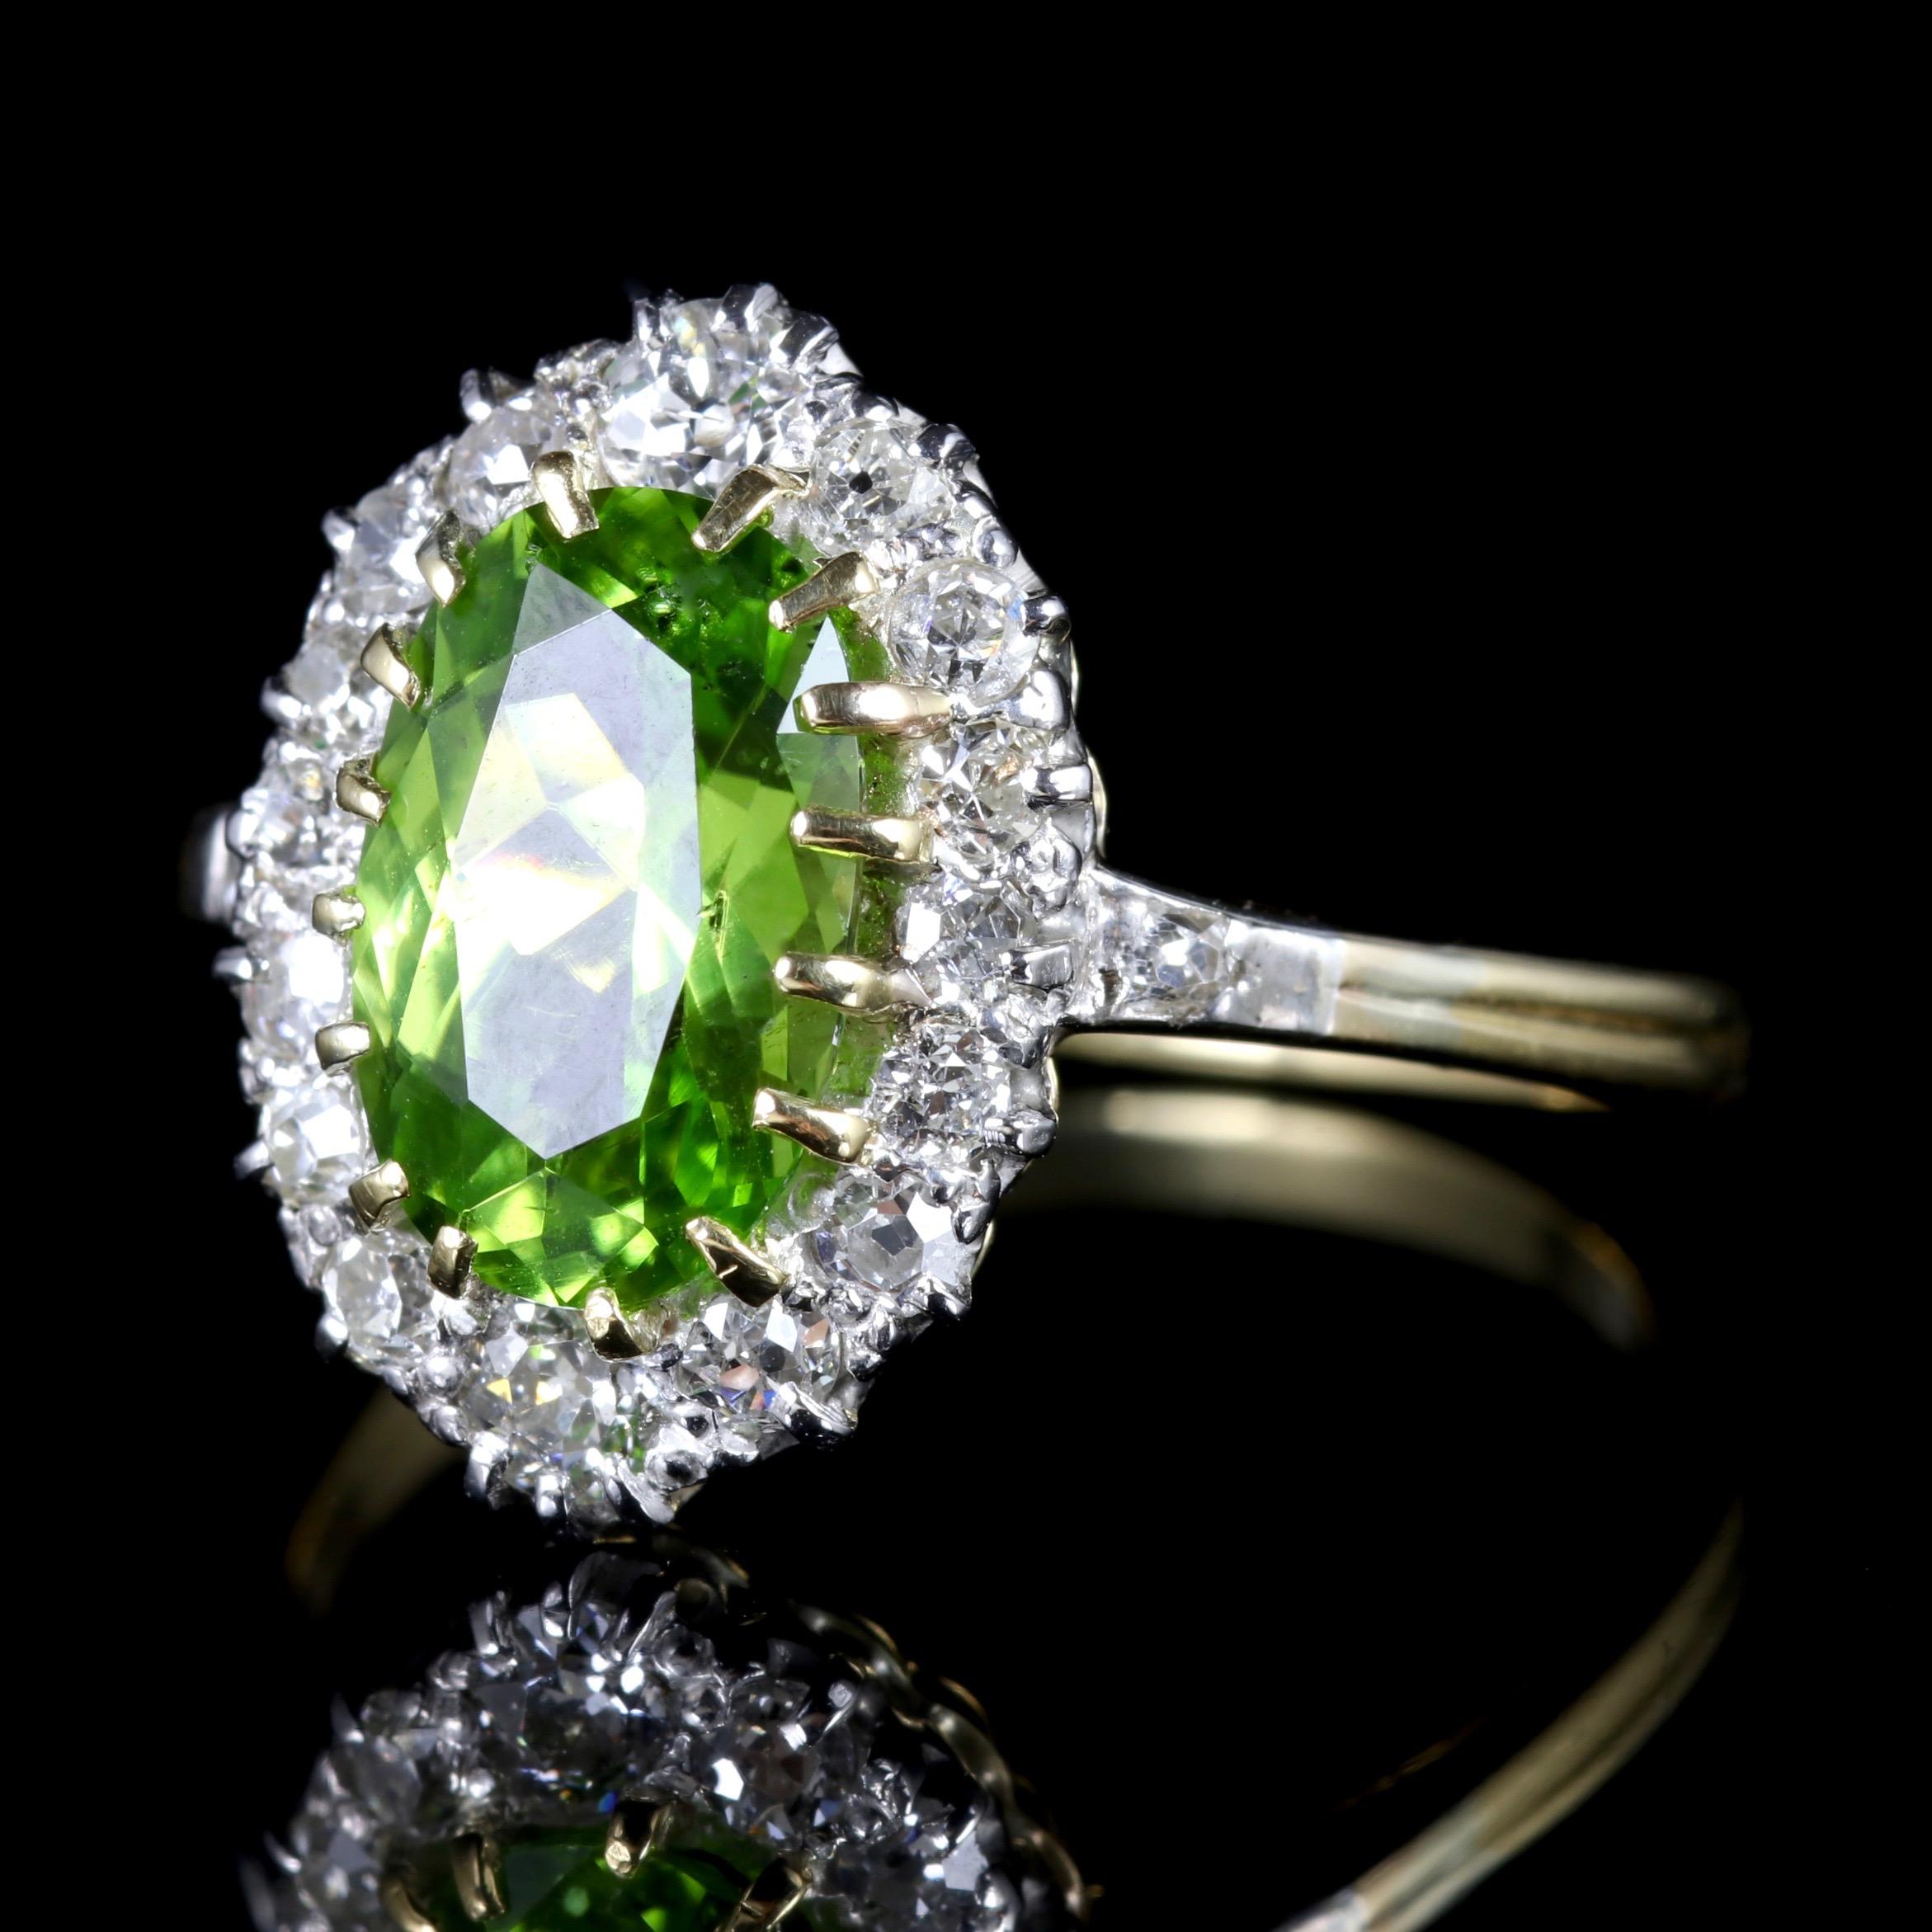 This fabulous Victorian 18ct Yellow Gold ring is Circa 1900.

The ring boasts a 2.85ct Peridot on the centre, surrounded by a halo of sparkling Diamonds.

The Peridot is a stone of lightness and beauty and was believed to be a stone of springtime by